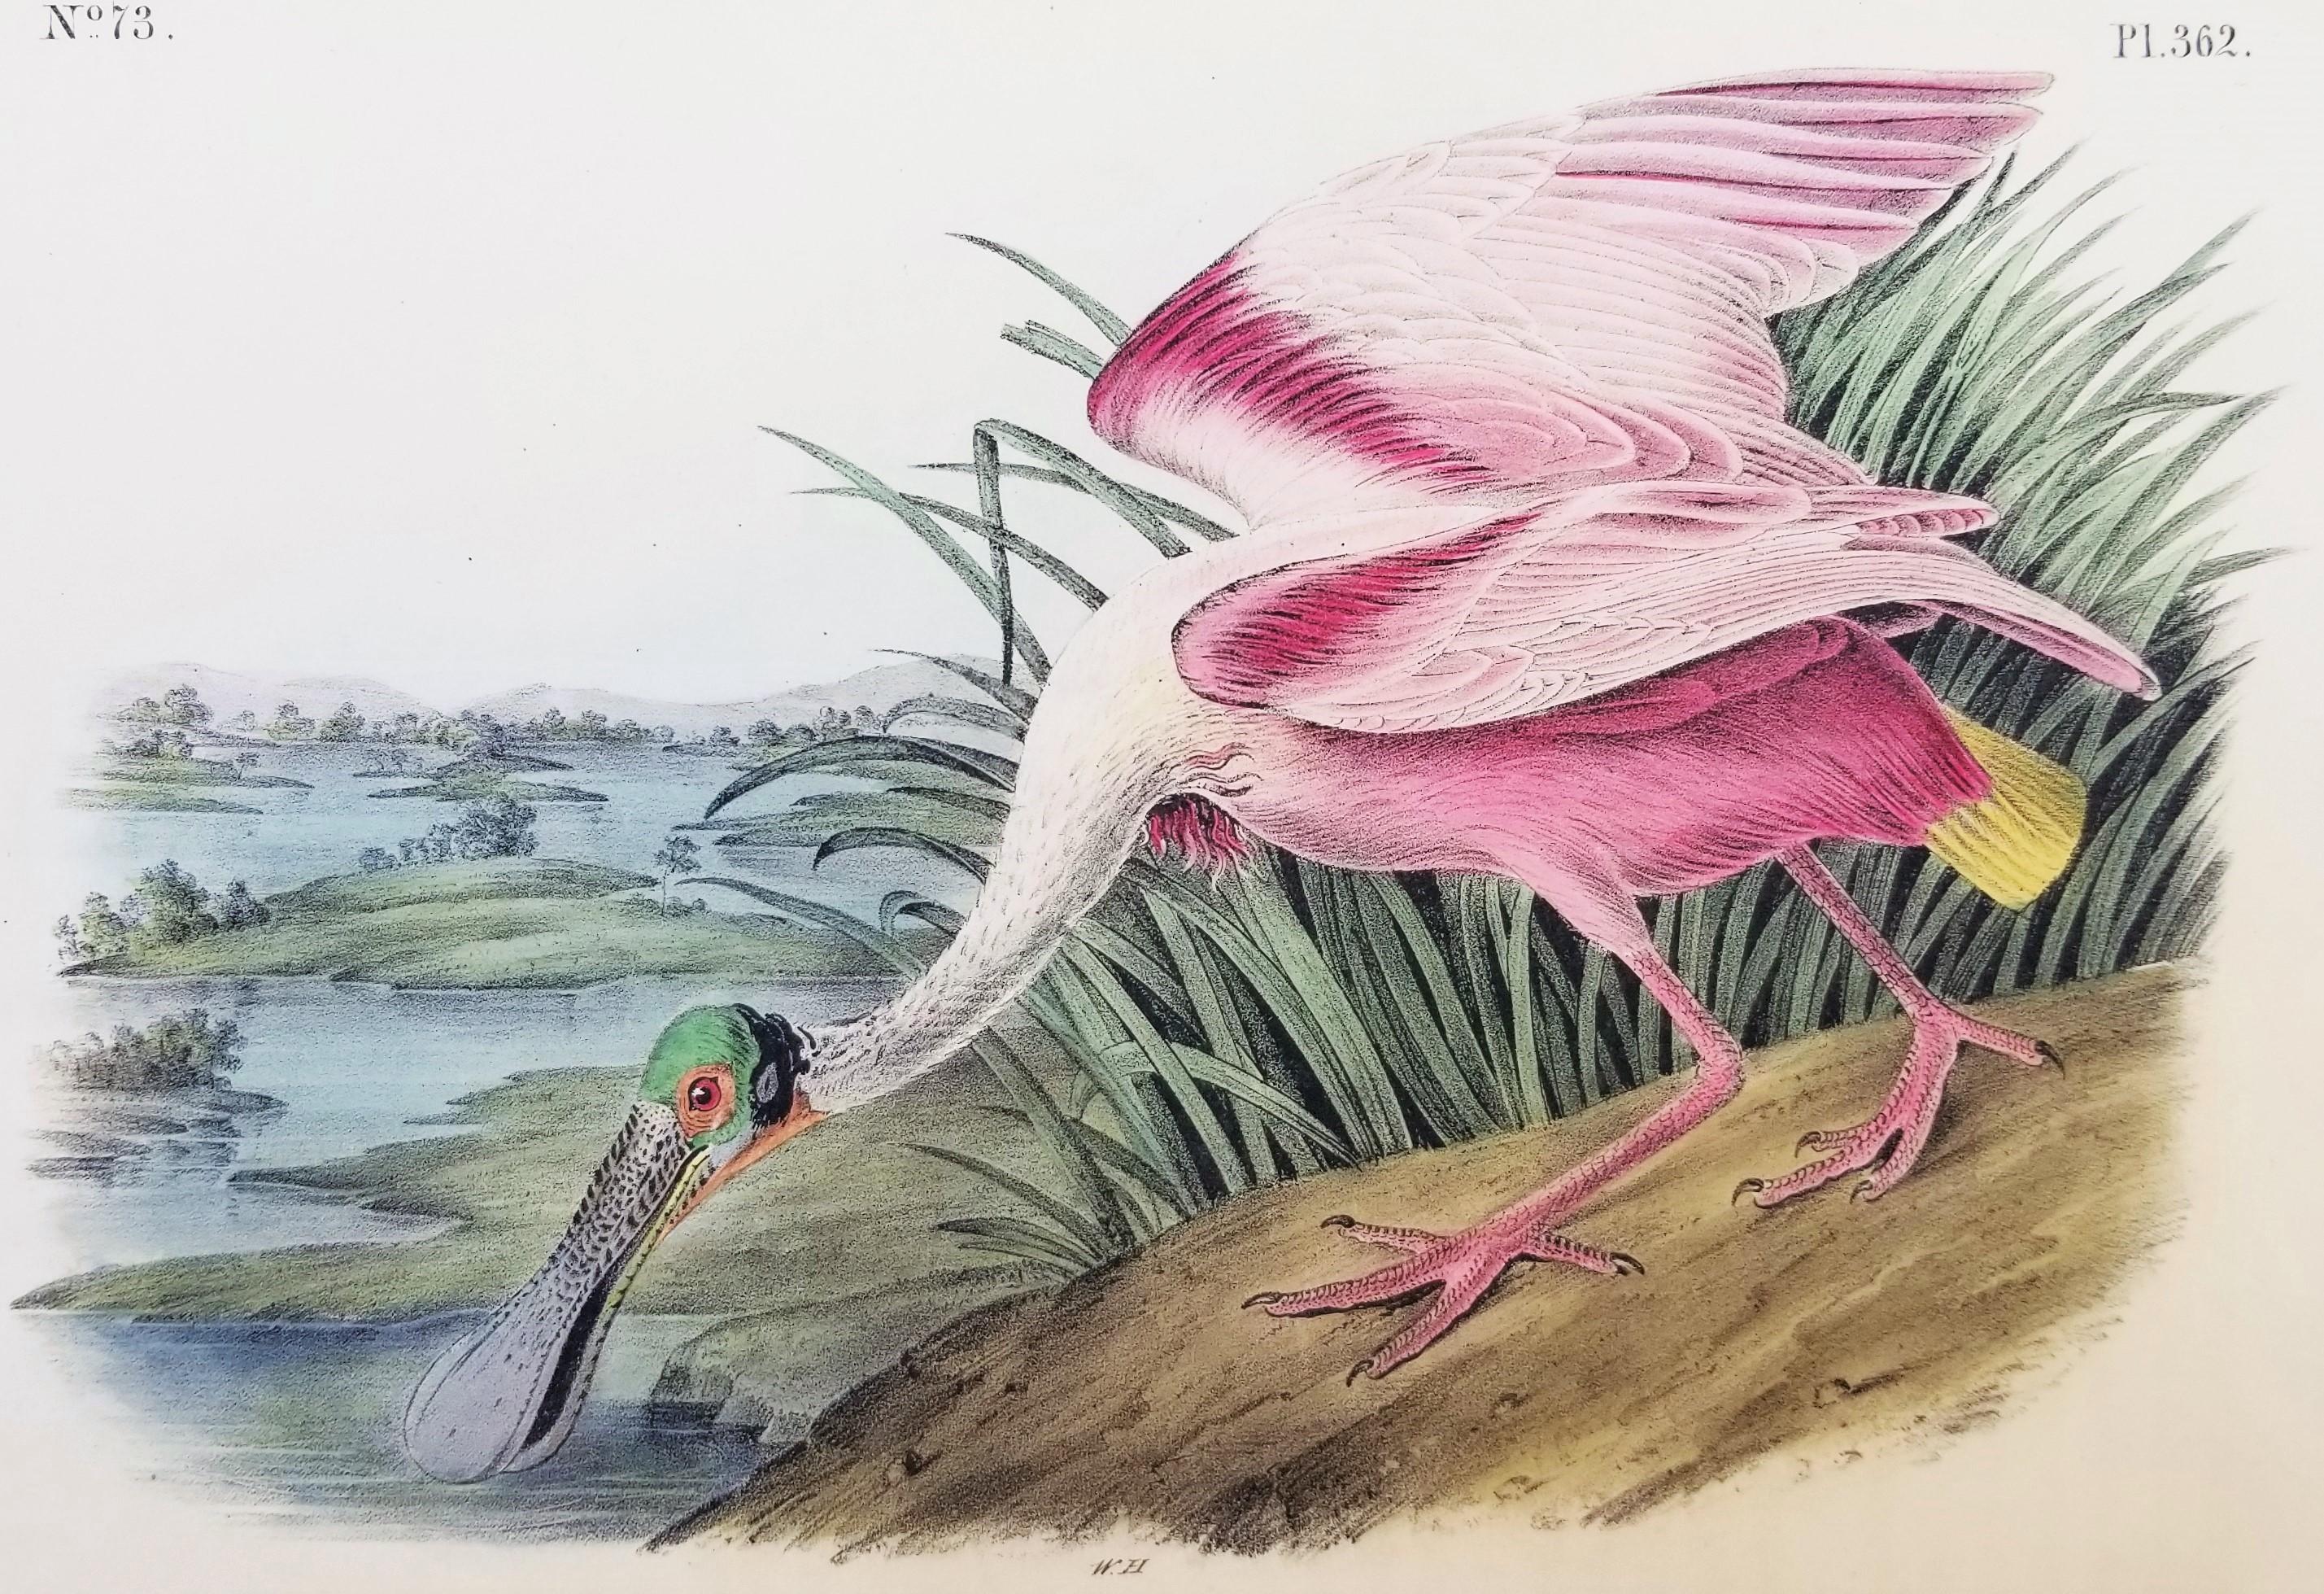 Artist: John James Audubon (American, 1785-1851)
Title: "Roseate Spoonbill" (Plate 362, No. 73)
Portfolio: The Birds of America, First Royal Octavo Edition
Year: 1840-1844
Medium: Original Hand-Colored Lithograph on wove paper
Limited edition: